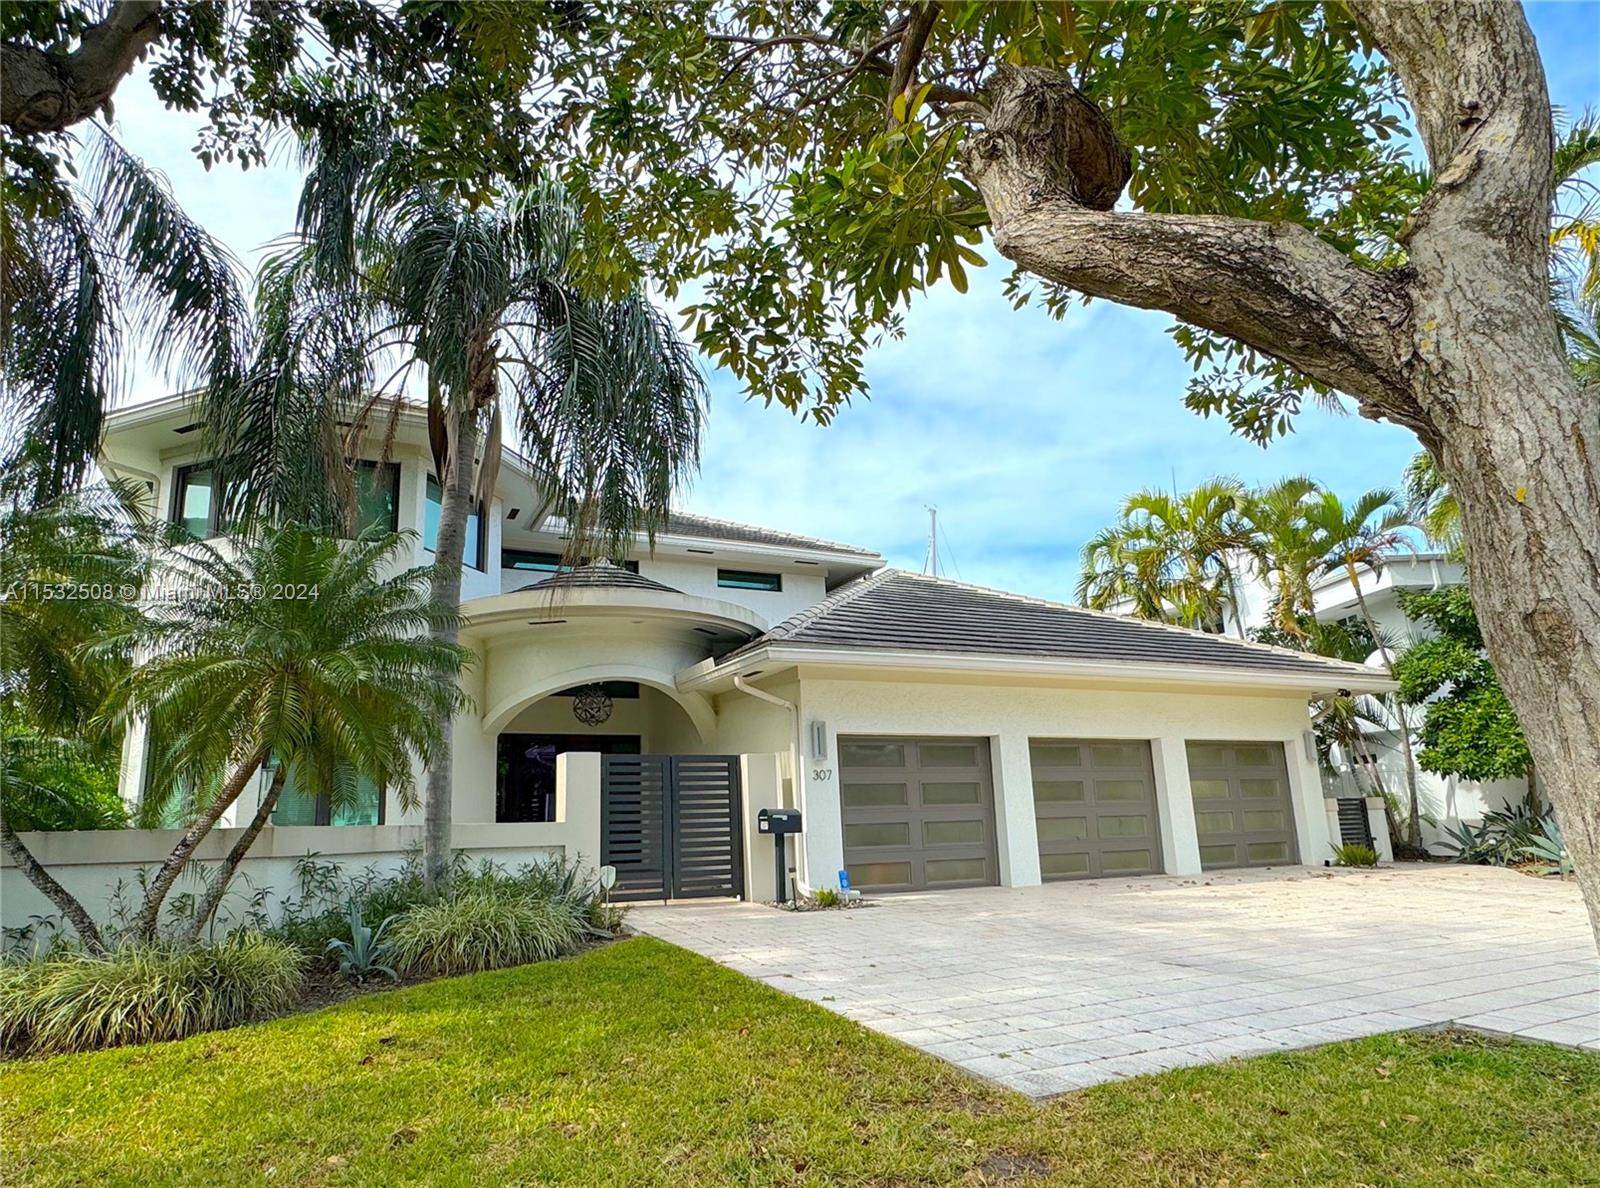 This exquisite smart home features a modern design with an open floor plan, high ceilings, loft area, Control4 automation, large island in kitchen with natural gas, seamless access to the ...